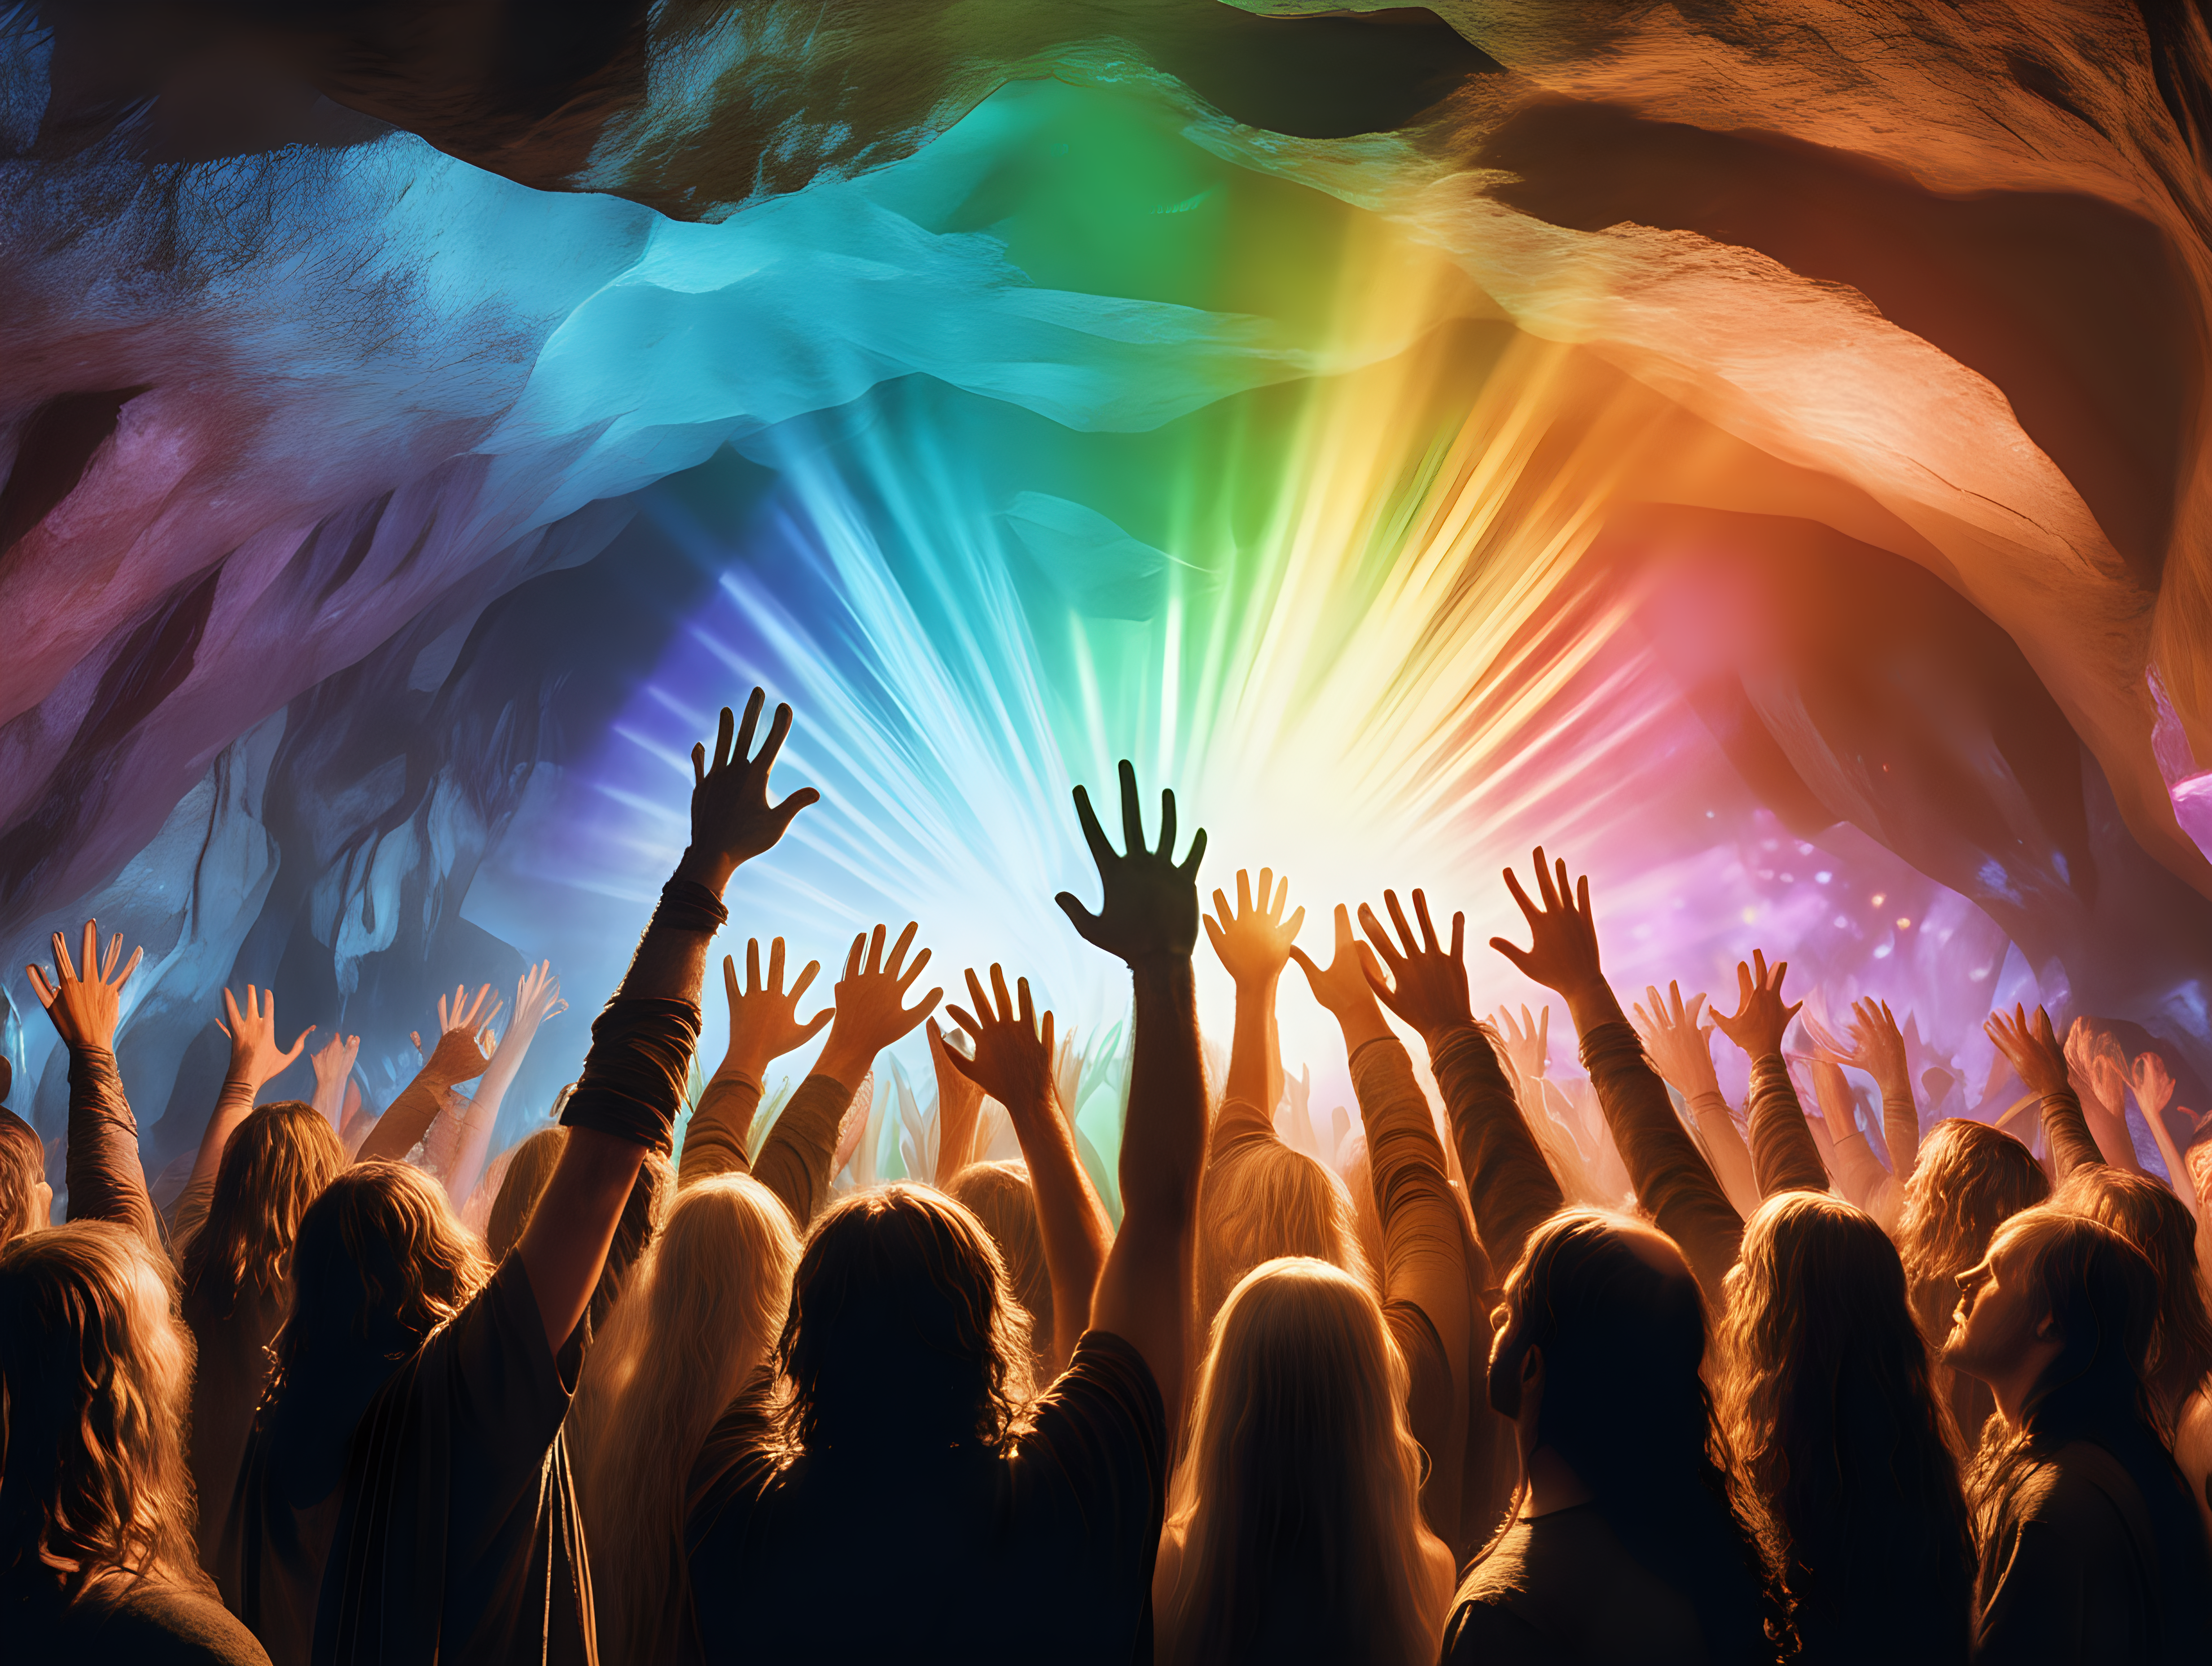 rave in a cave in the lord of the rings universe prism spectrum light with people having hands in the air